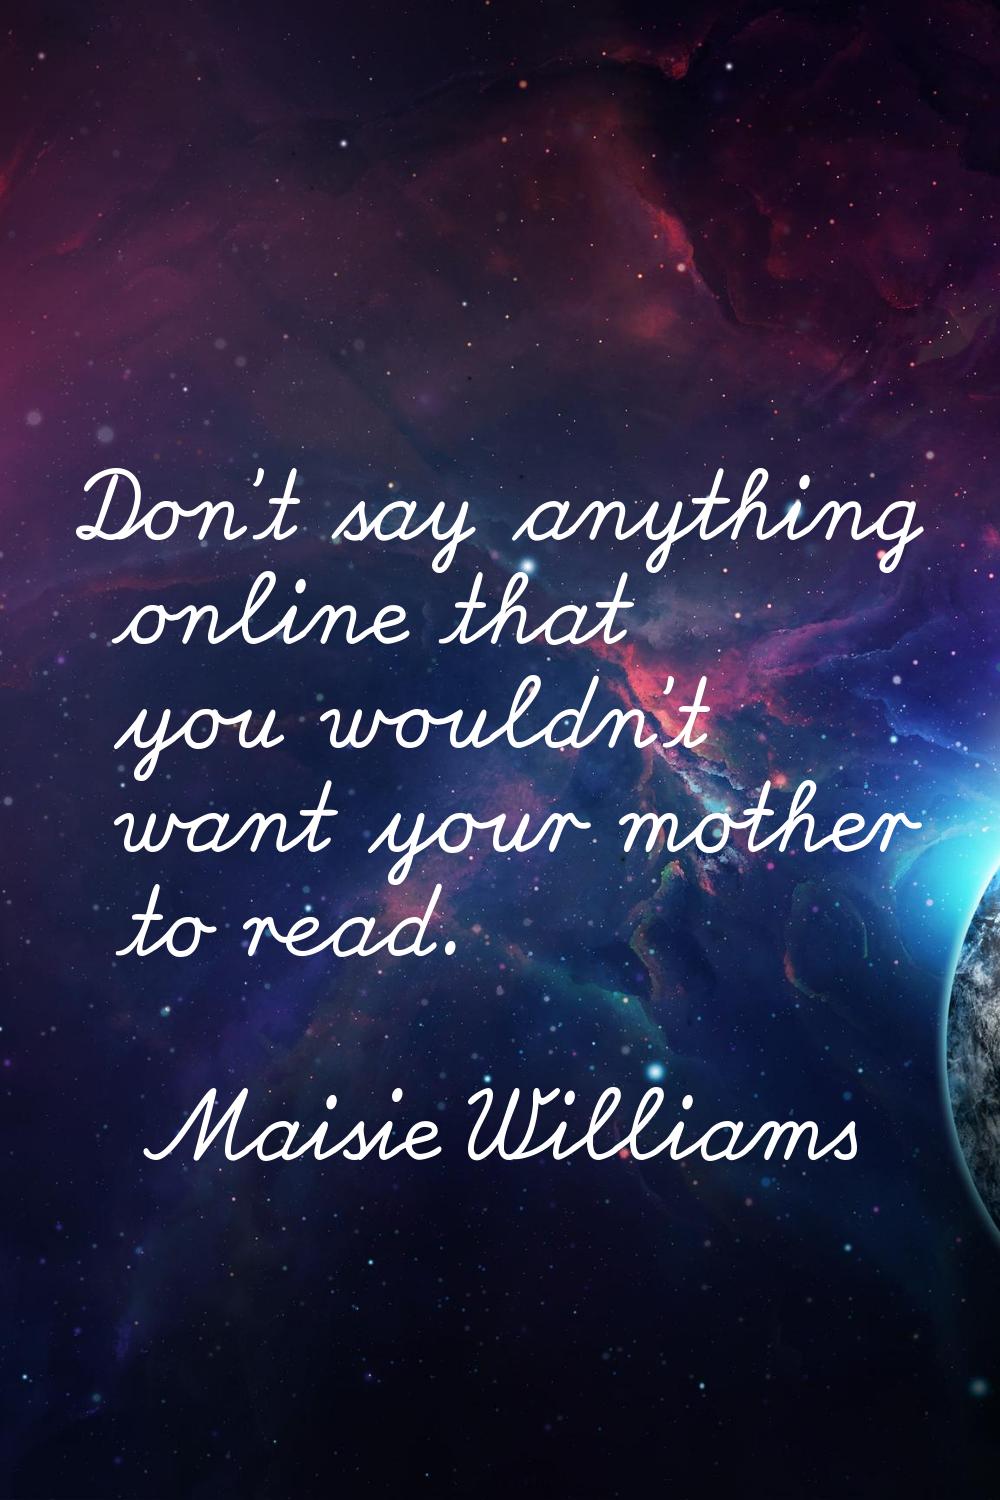 Don't say anything online that you wouldn't want your mother to read.